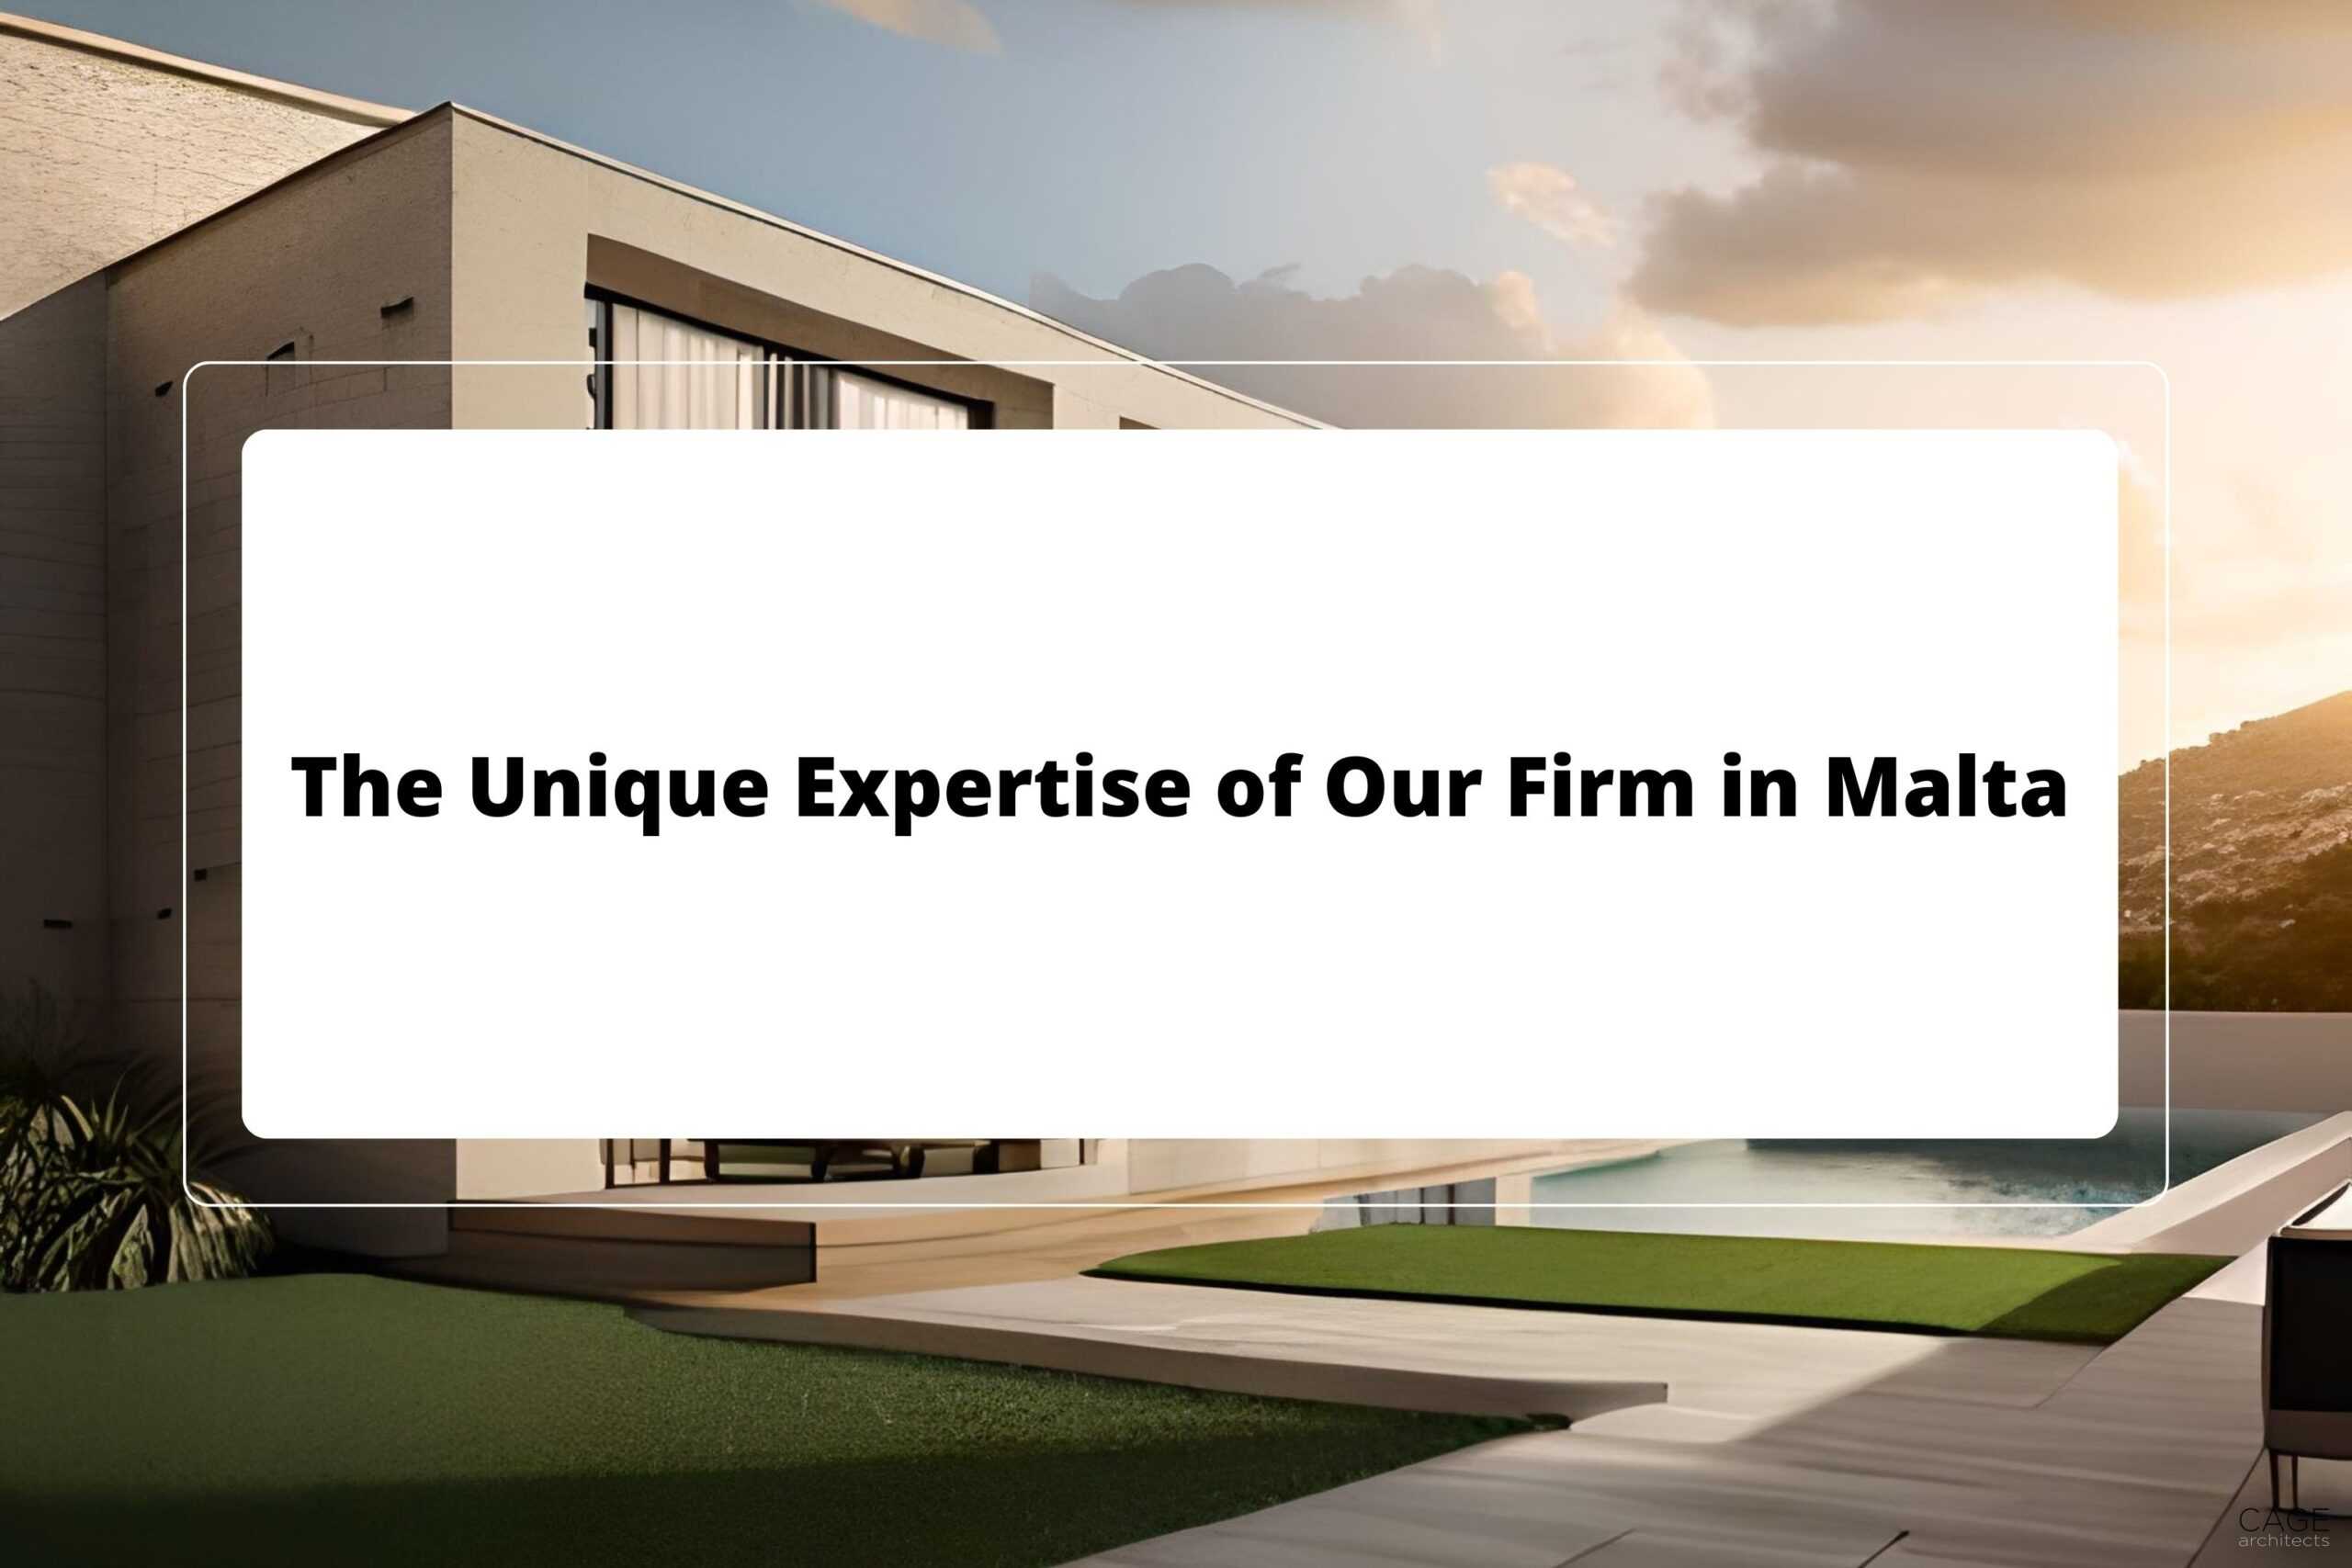 Architectural Design: The Unique Expertise of Our Firm in Malta